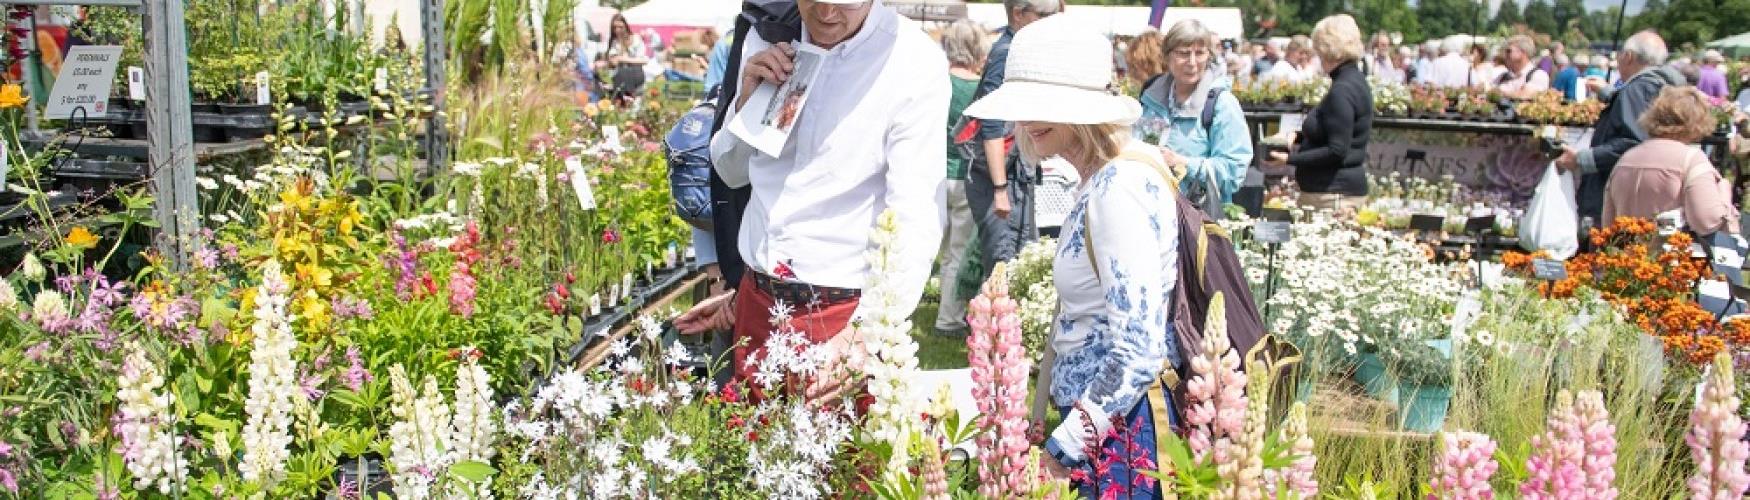 Couple admiring flowers at Blenheim Palace Flower Show